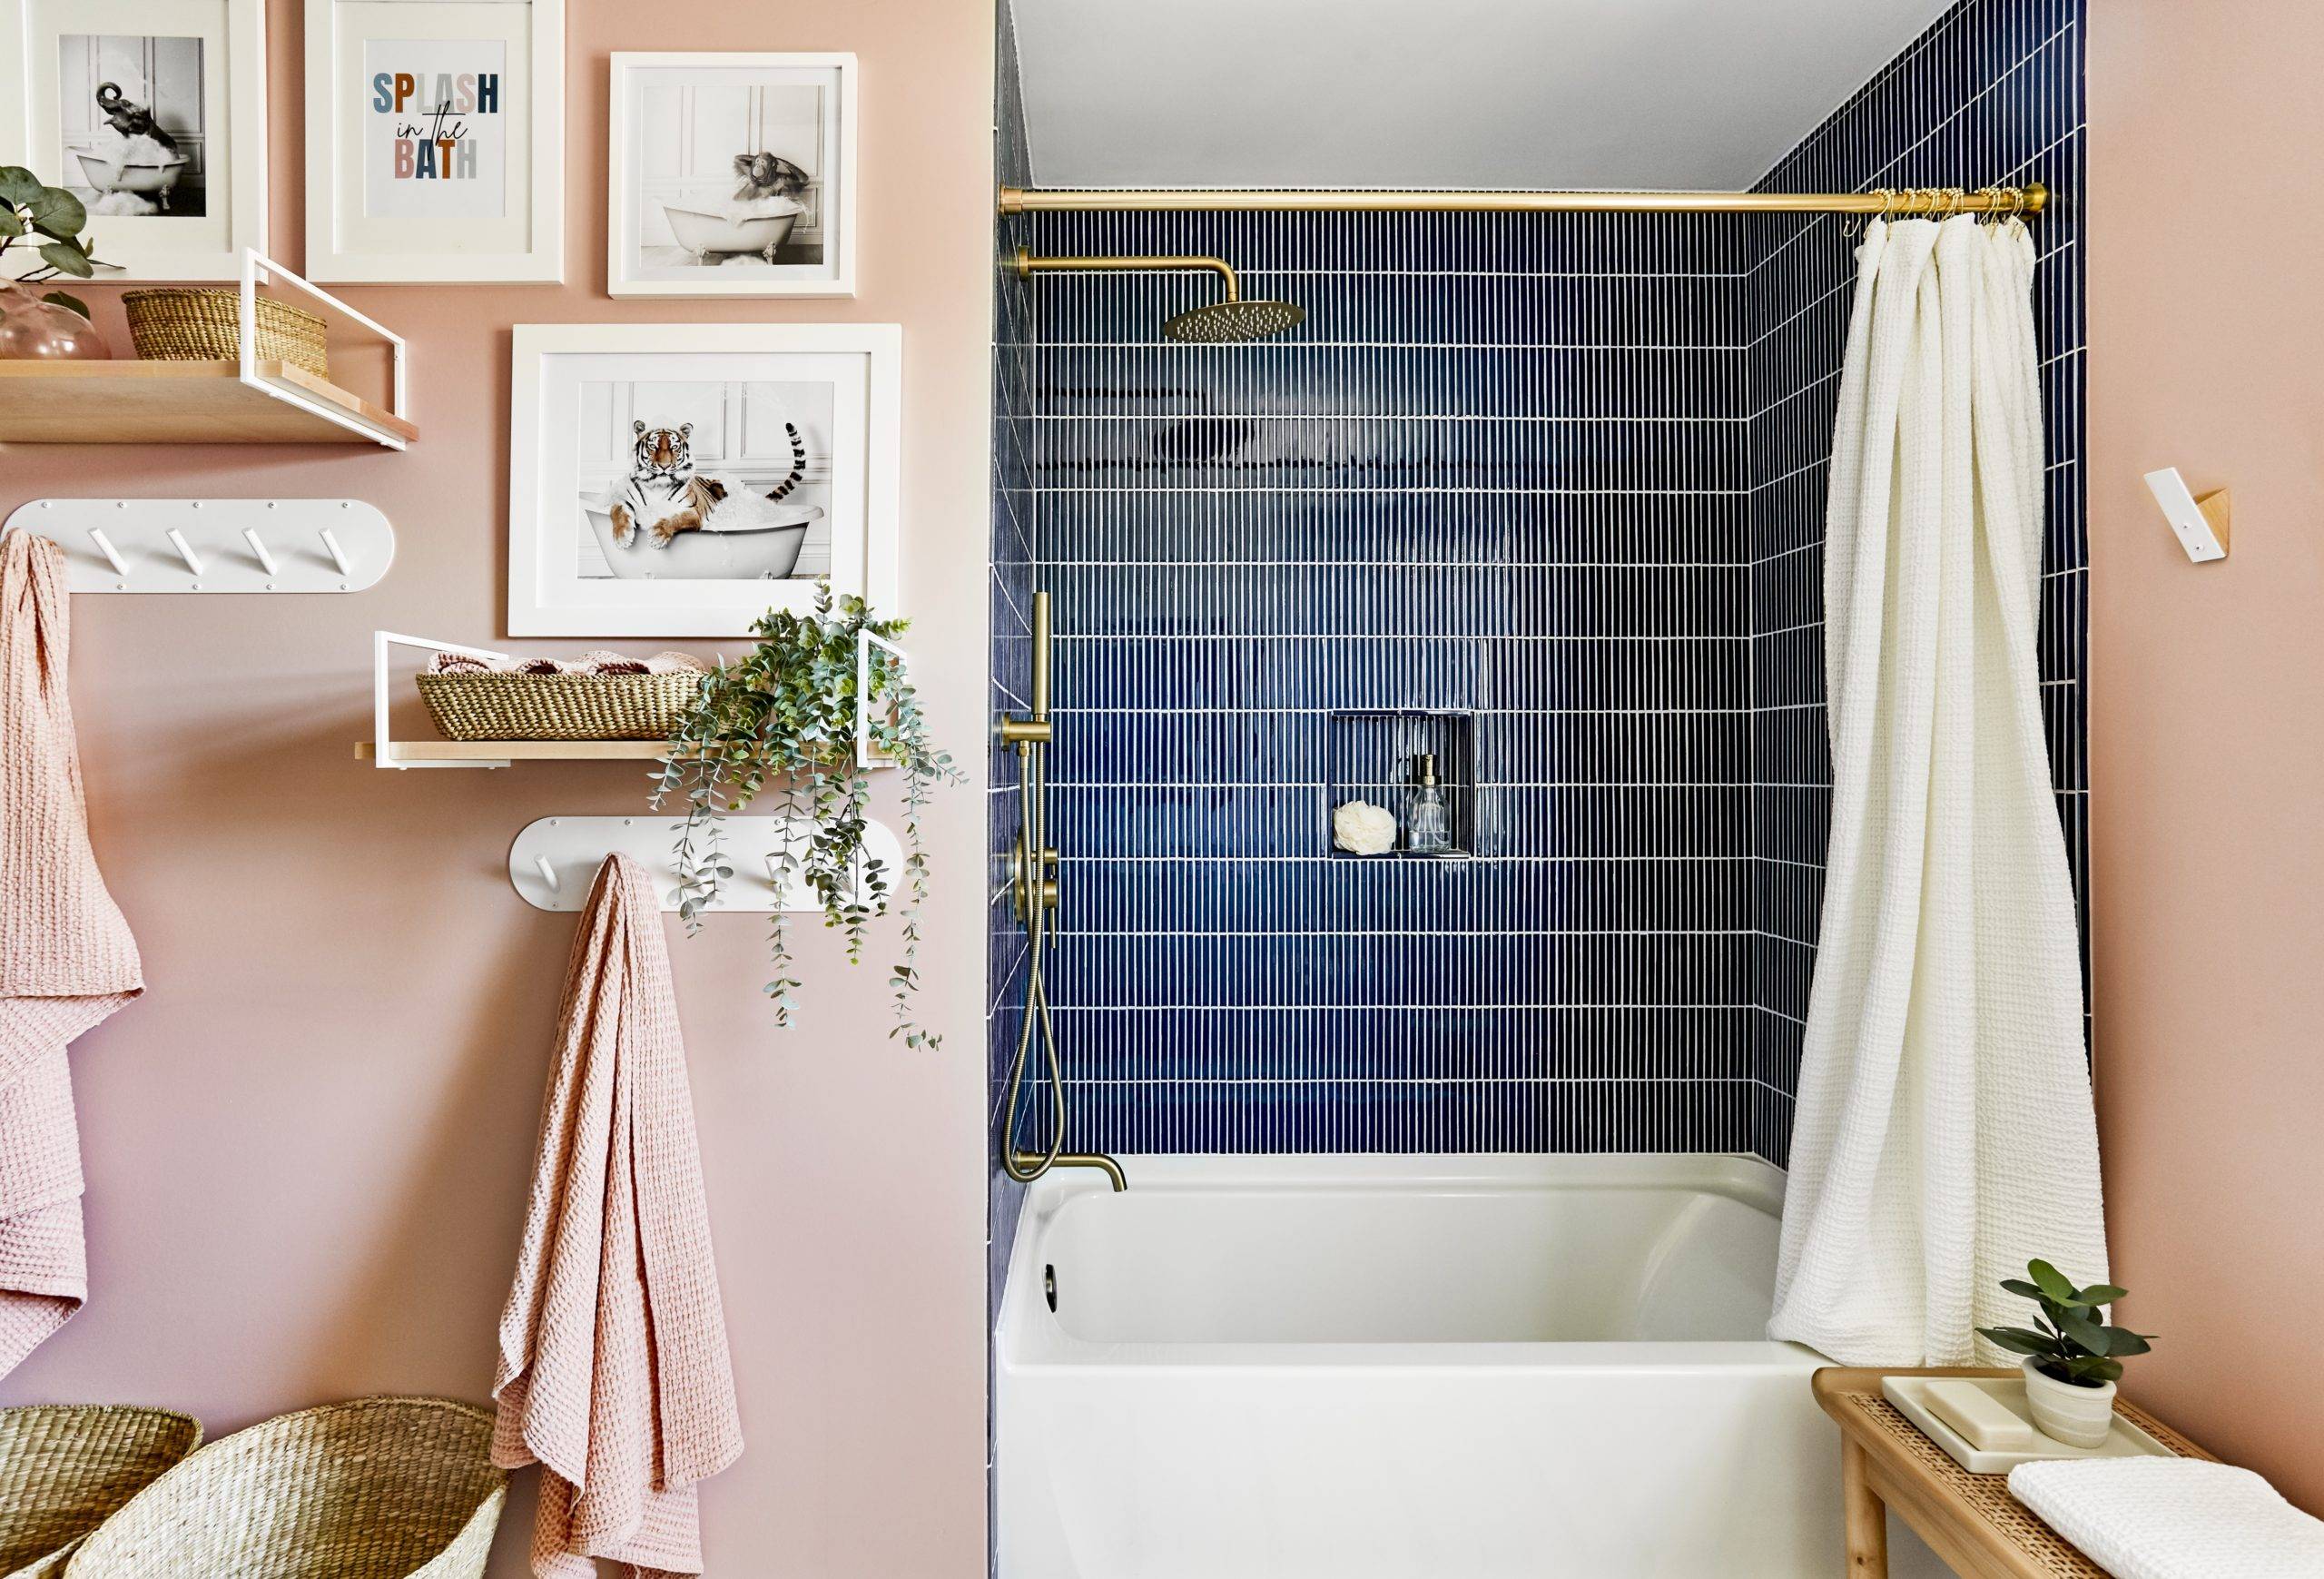 Kids bathroom with blue shower tile and pink walls